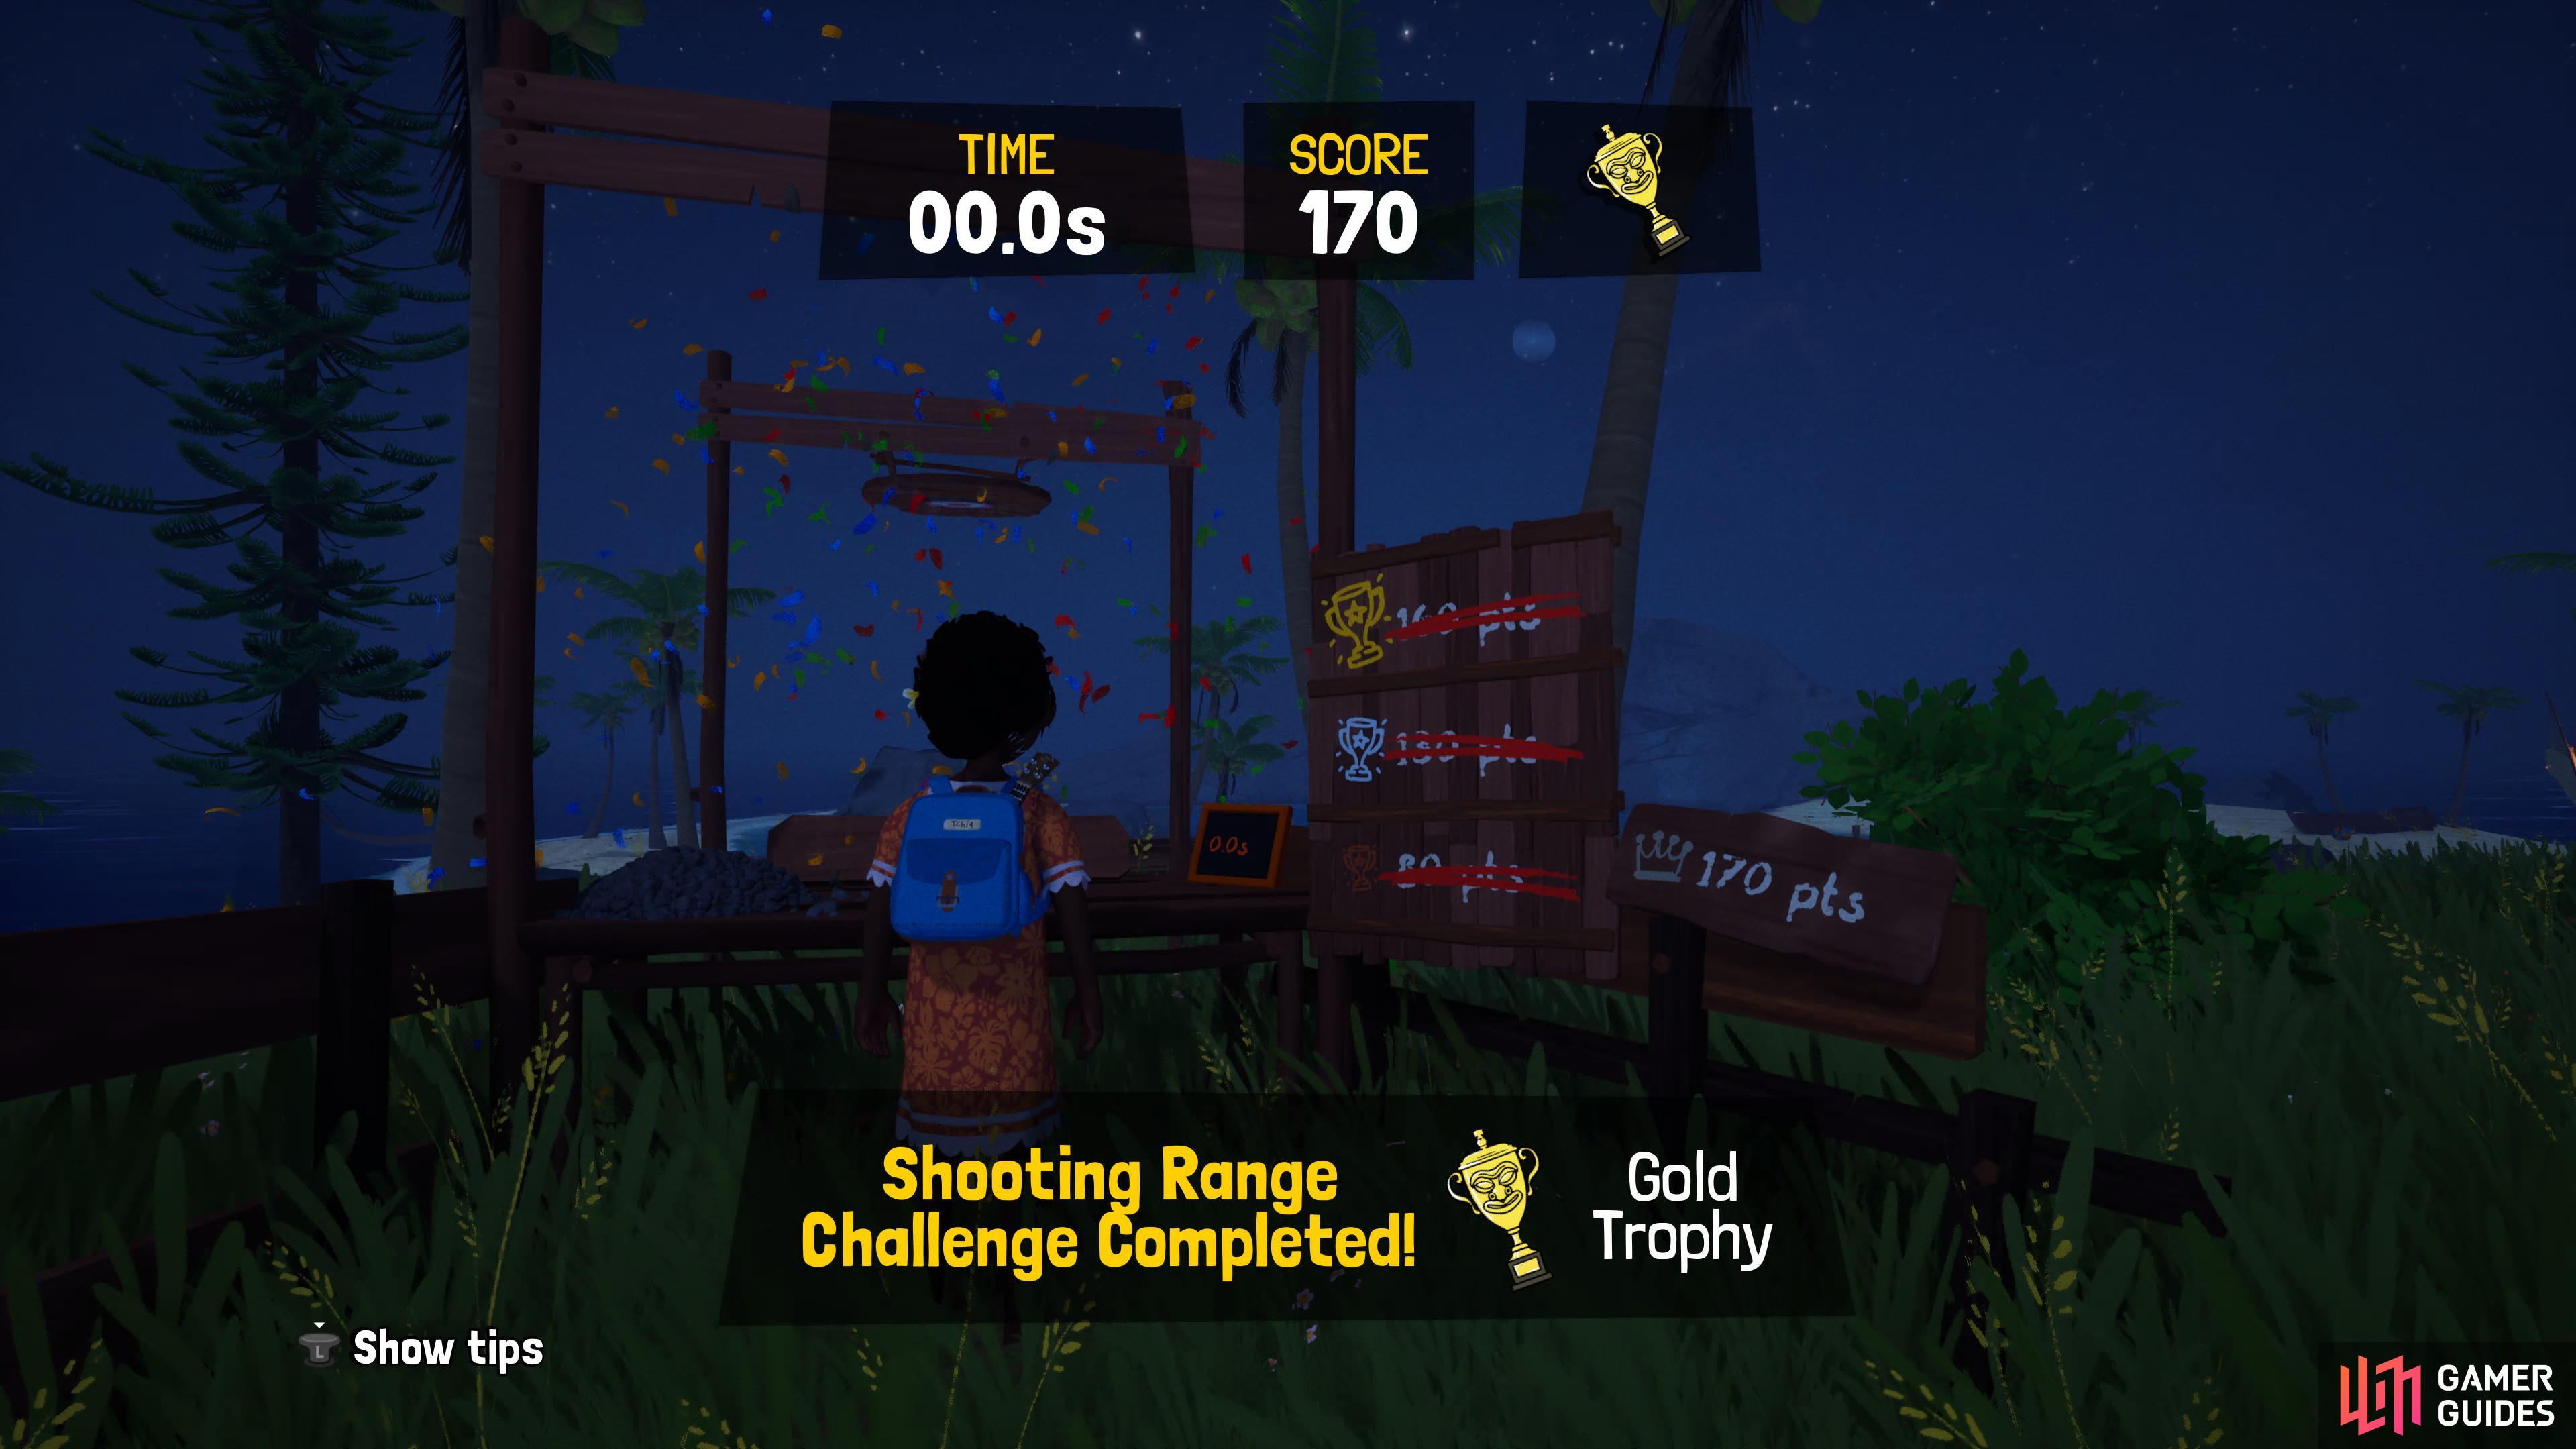 Getting a gold trophy at the Shooting Range Challenge in !Tchia.